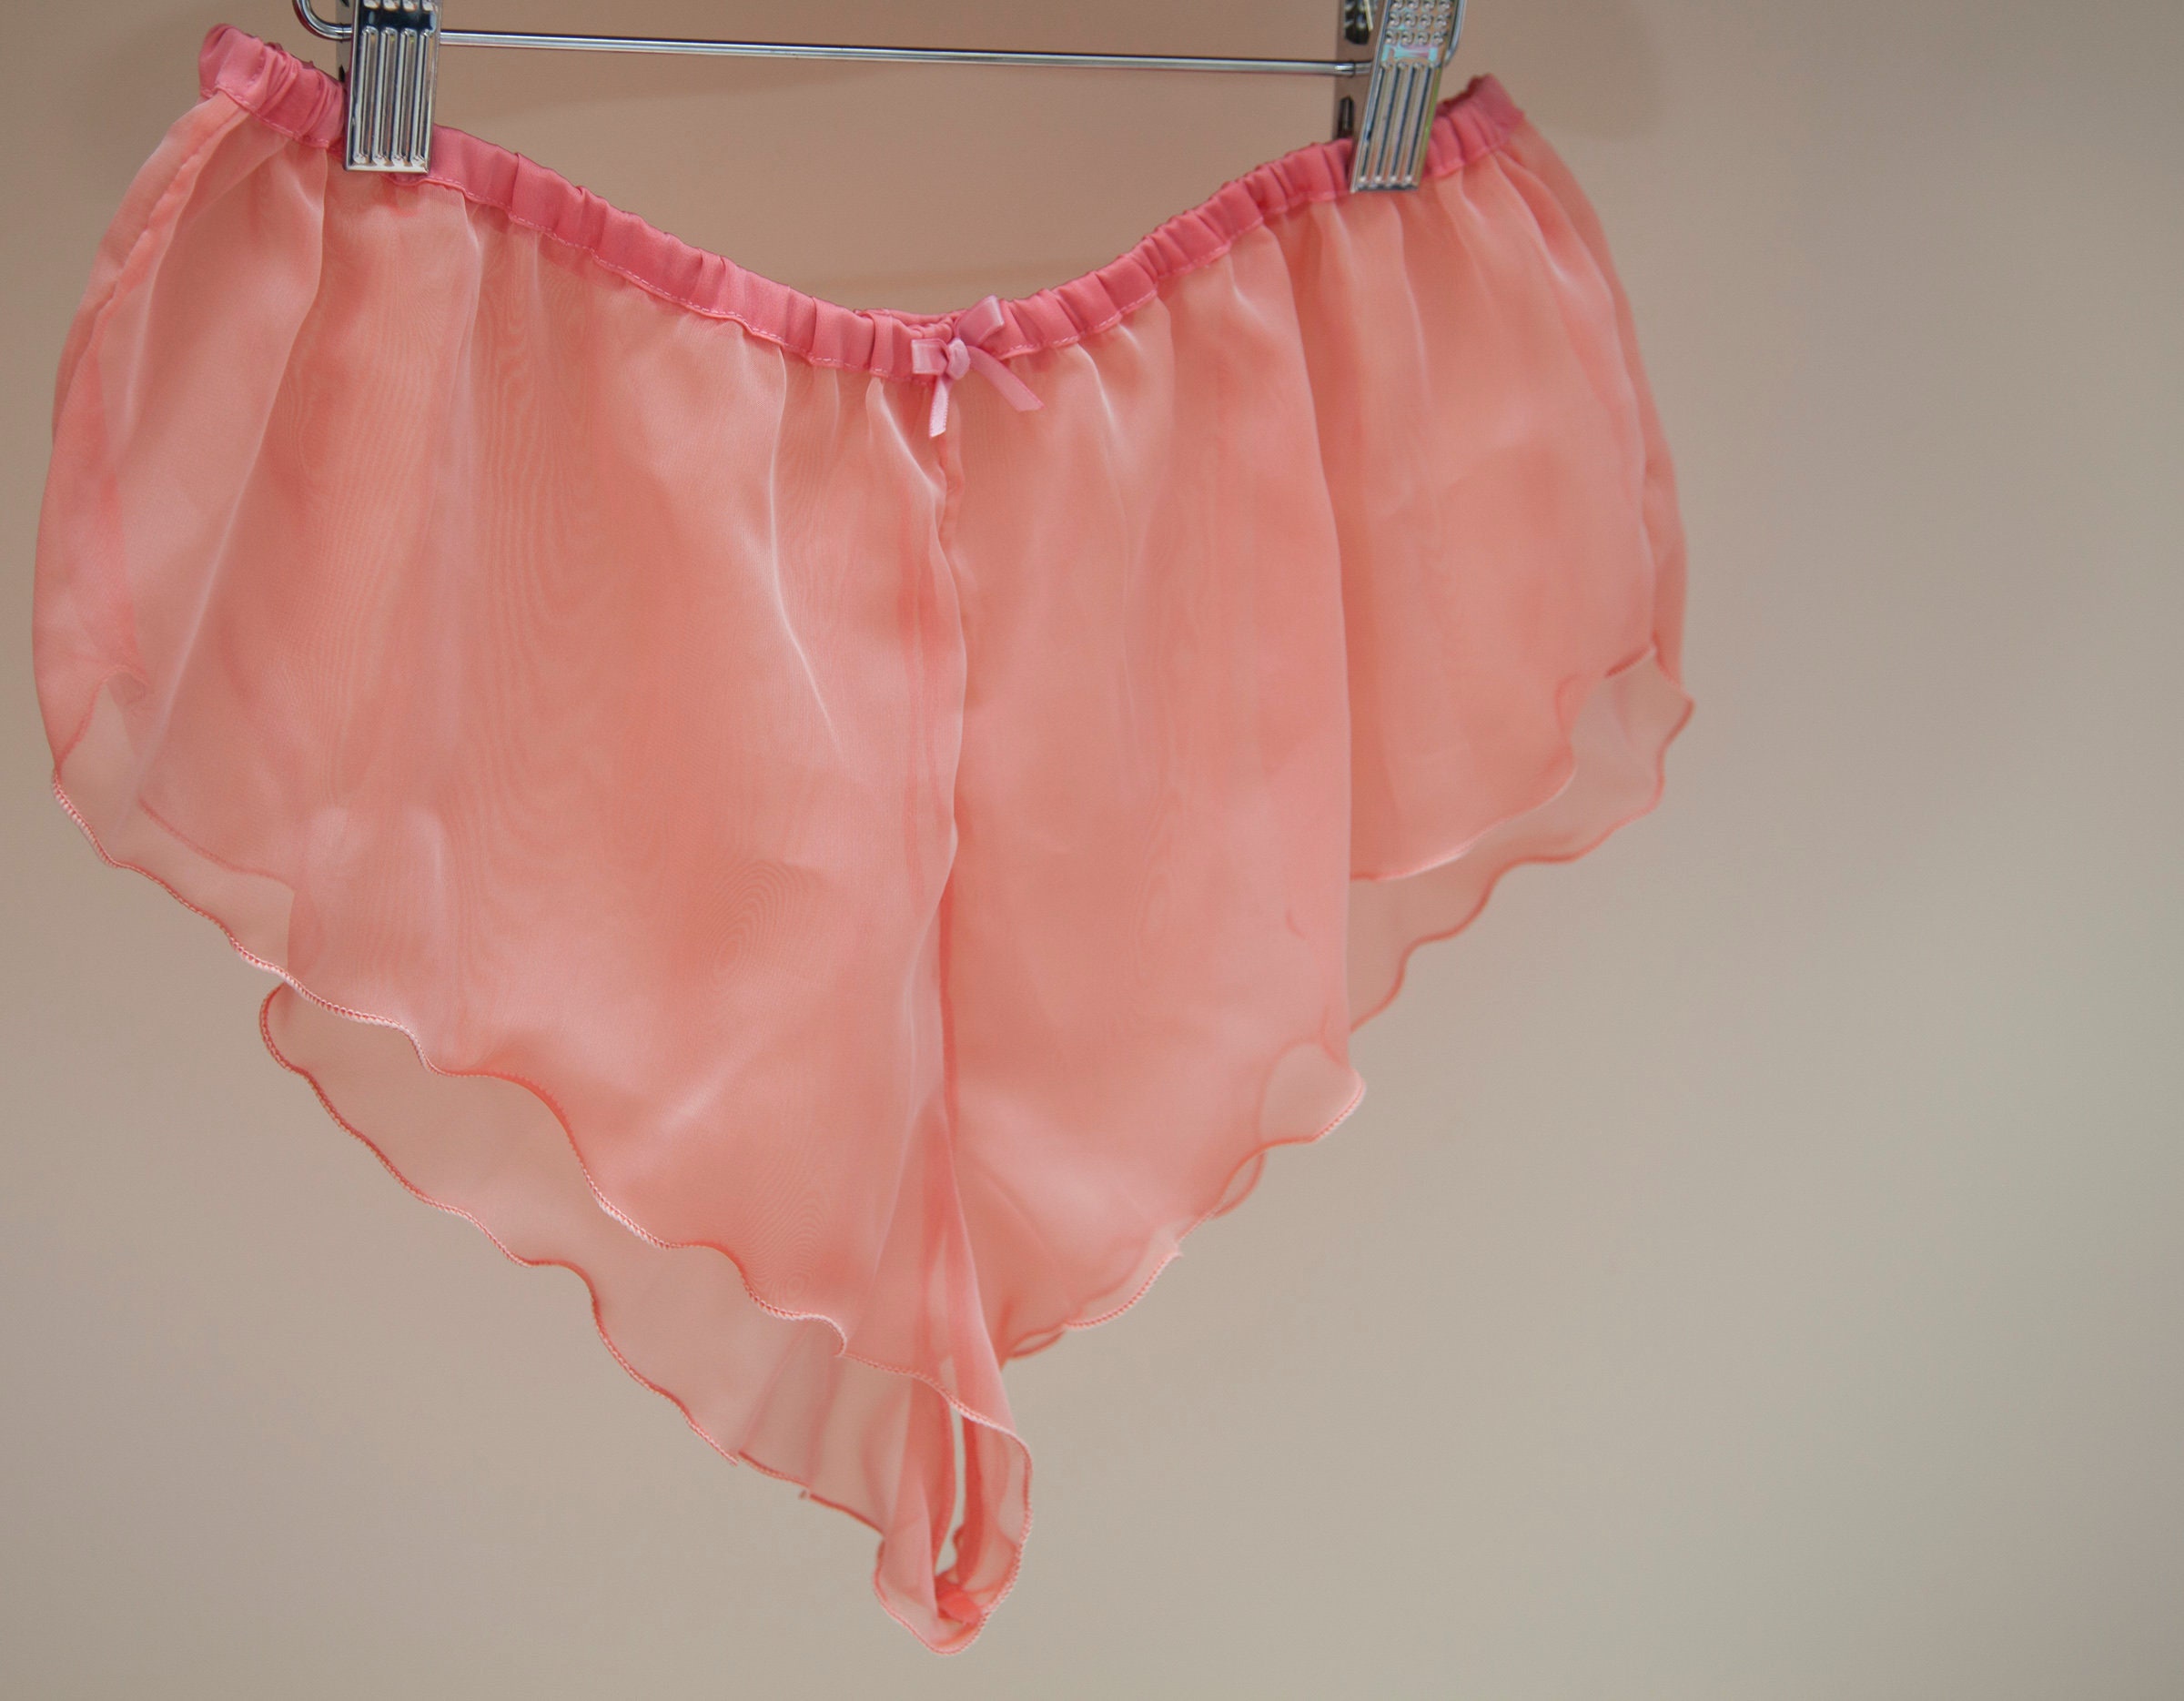 Pink Sheer Chiffon French Knickers Panties See Through Sexy